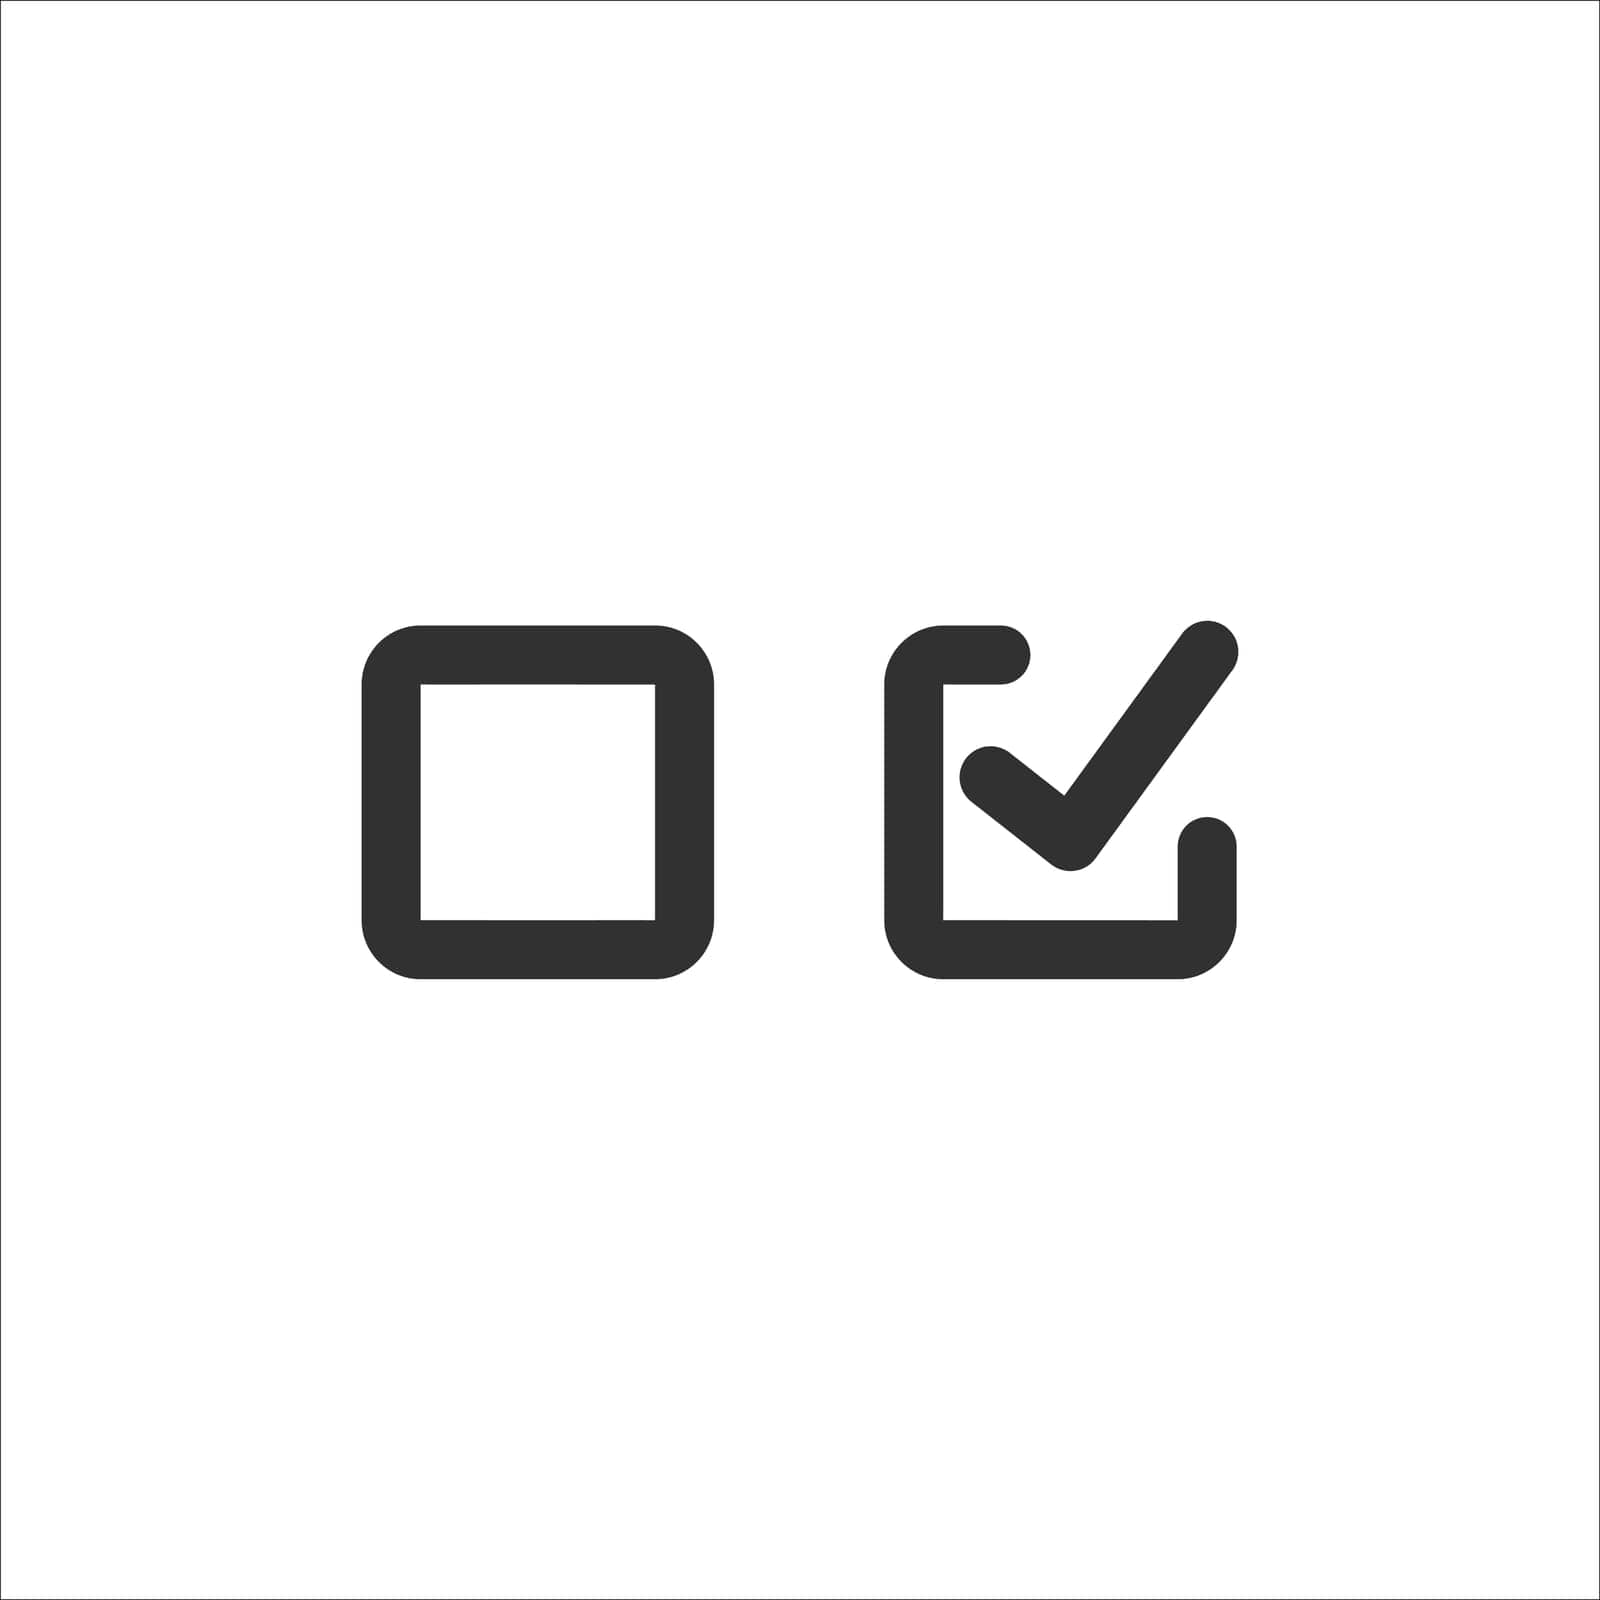 Checkbox set with blank and checked checkbox line art vector icon for apps and websites